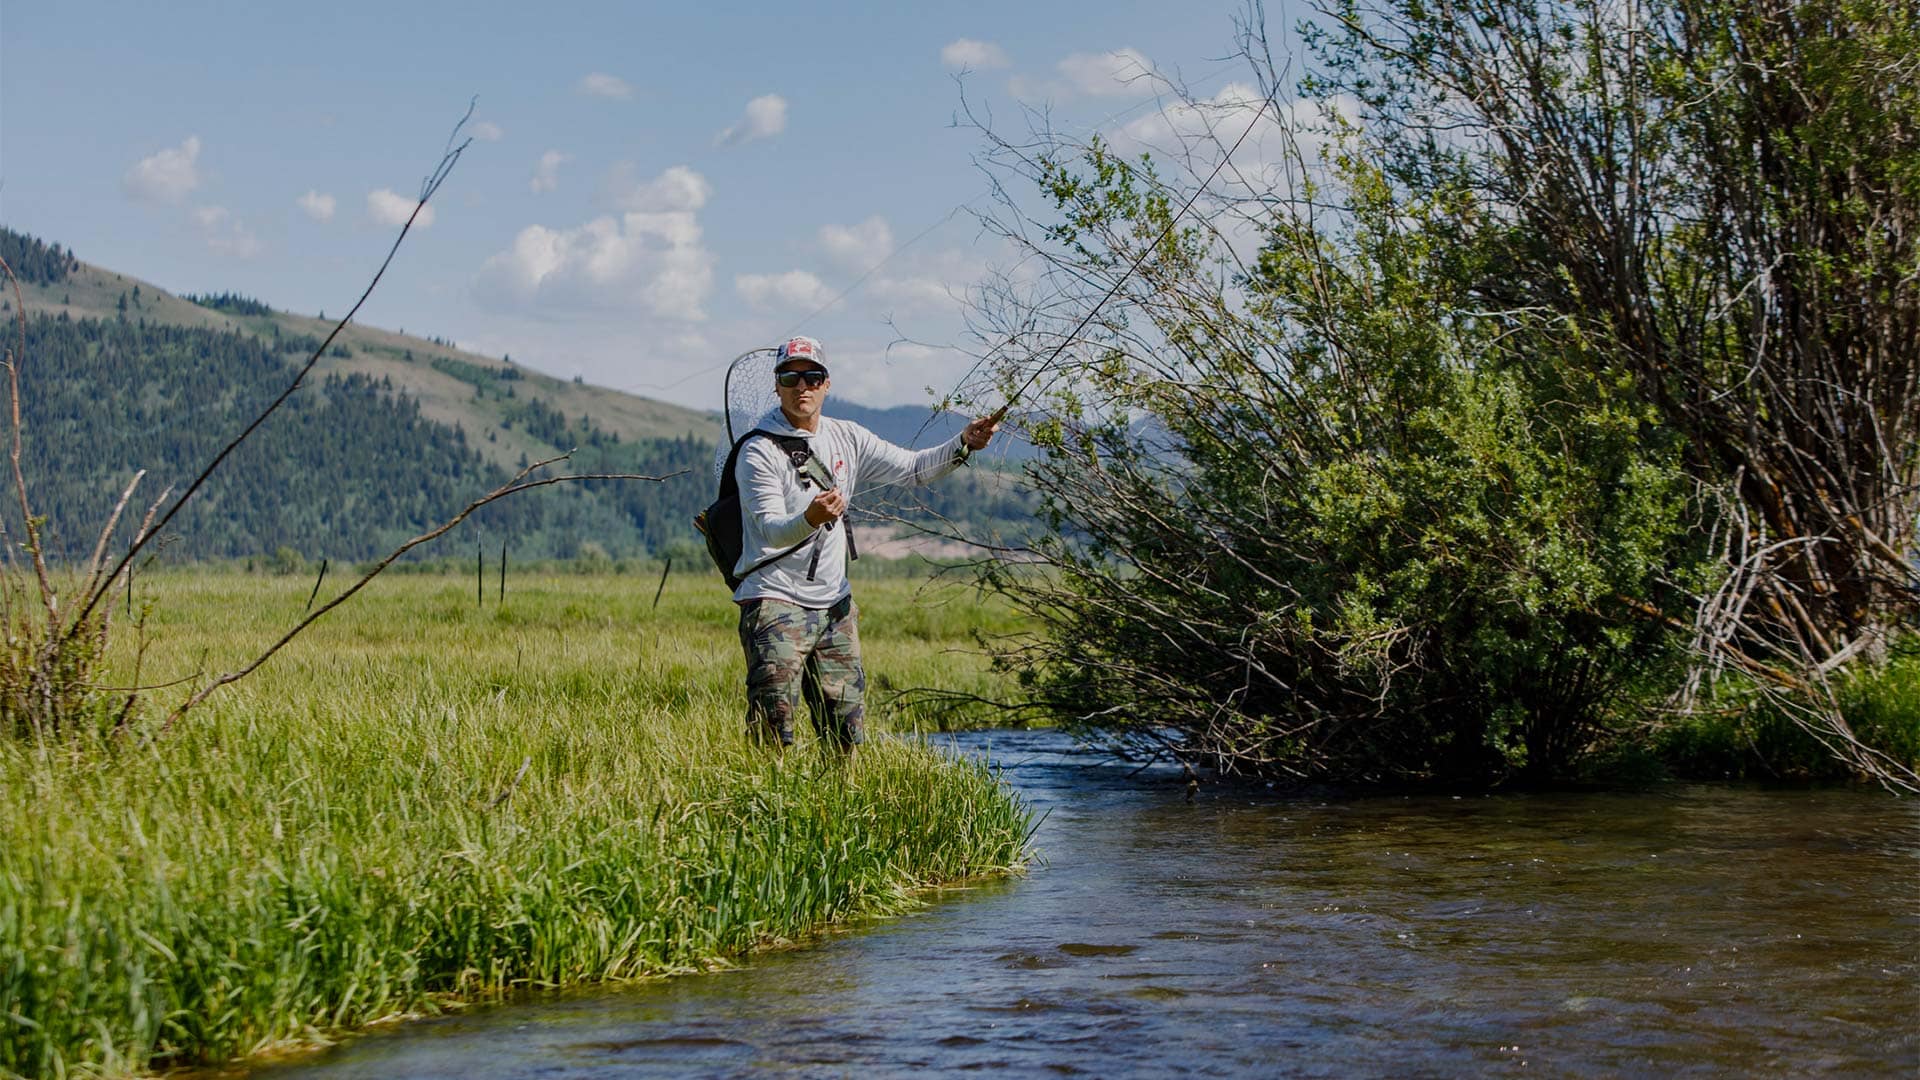 Man fly fishing on a creek in the Tetons near Jackson Hole, Wyoming. Photo by Mark Epstein